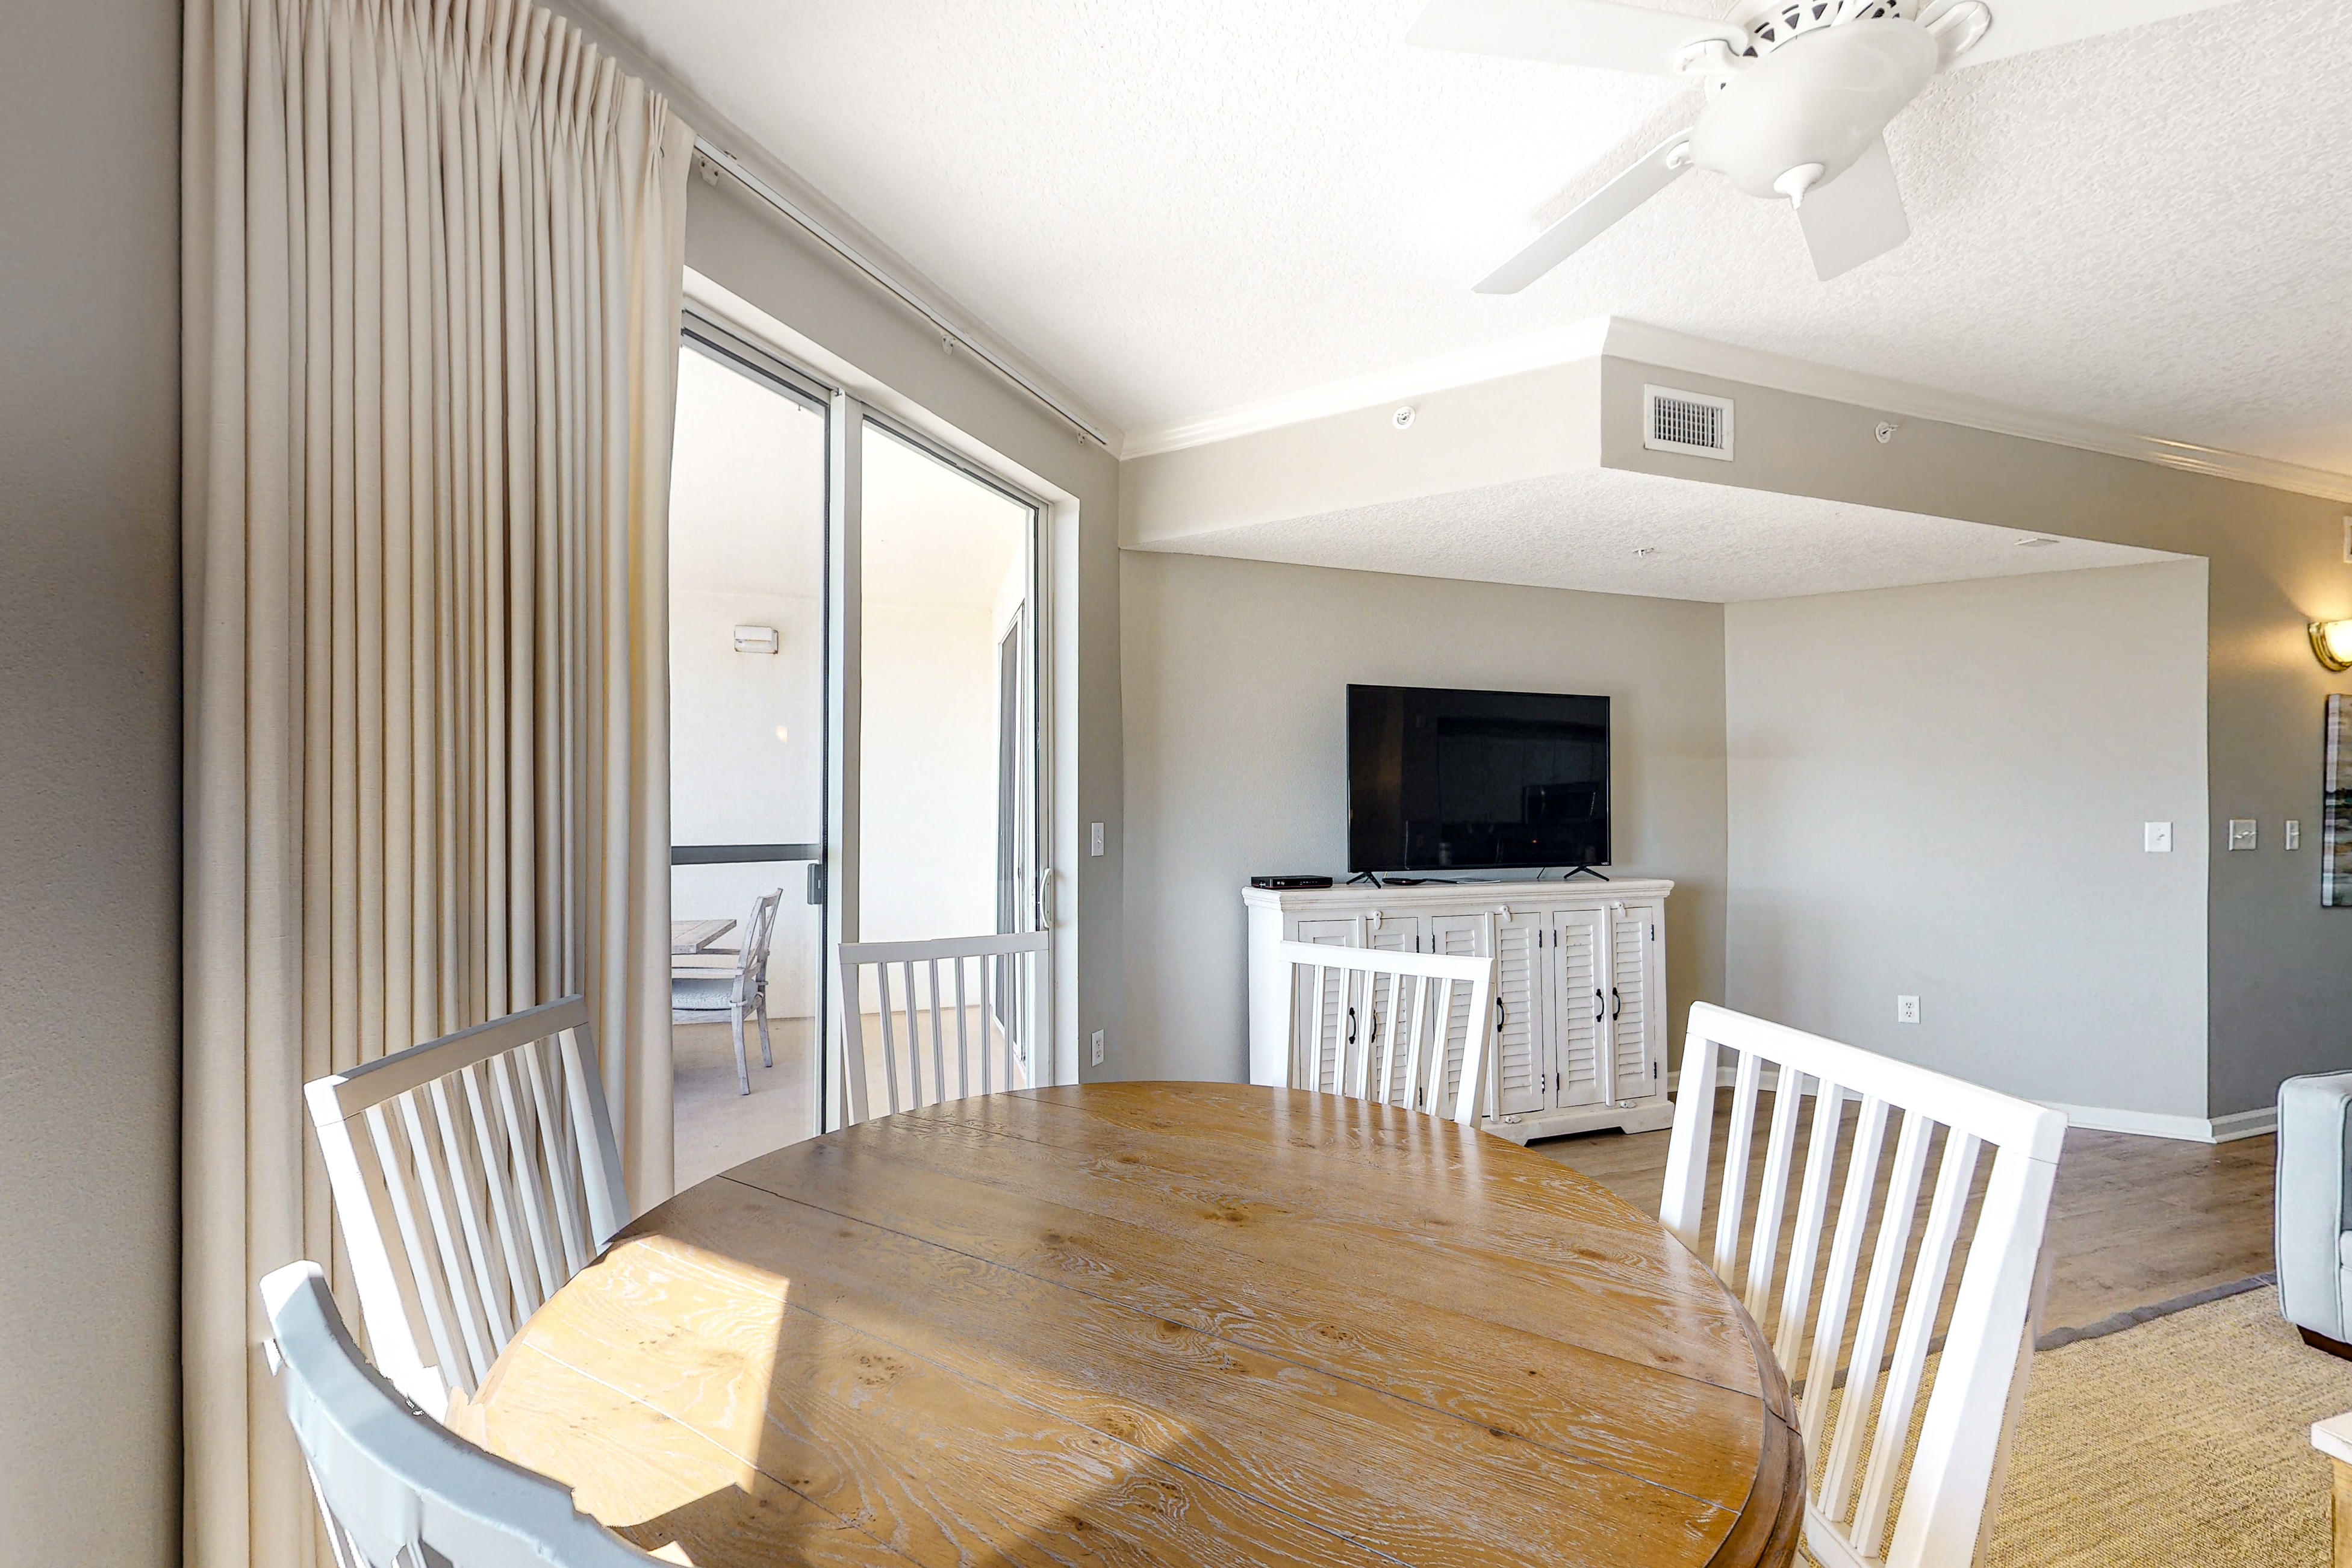 Dunes of Seagrove A301 Condo rental in Dunes of Seagrove in Highway 30-A Florida - #7